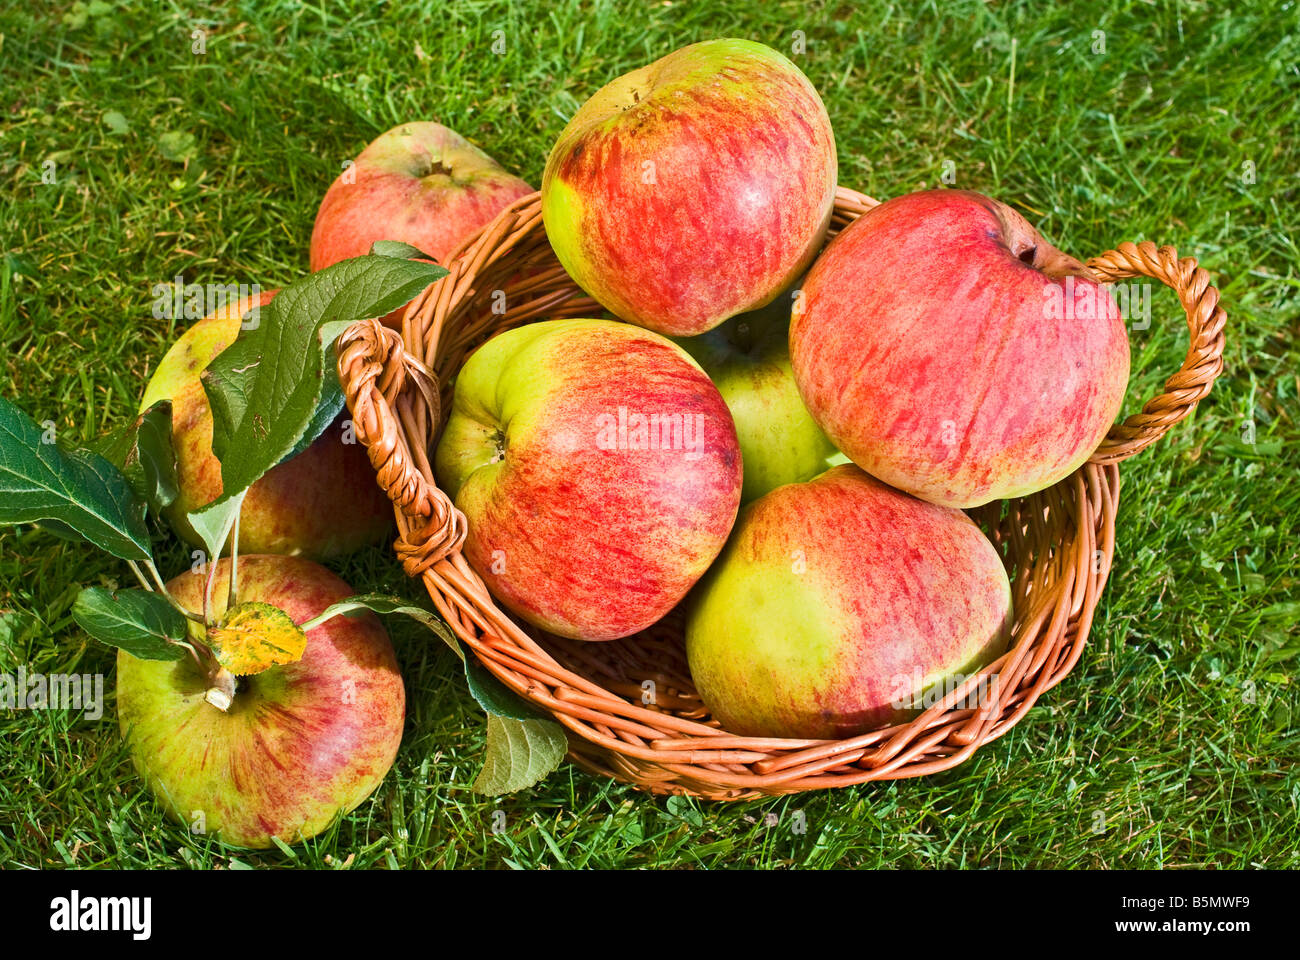 Freshly harvested organically grown cooking apples 'Howgate Wonder' Stock Photo